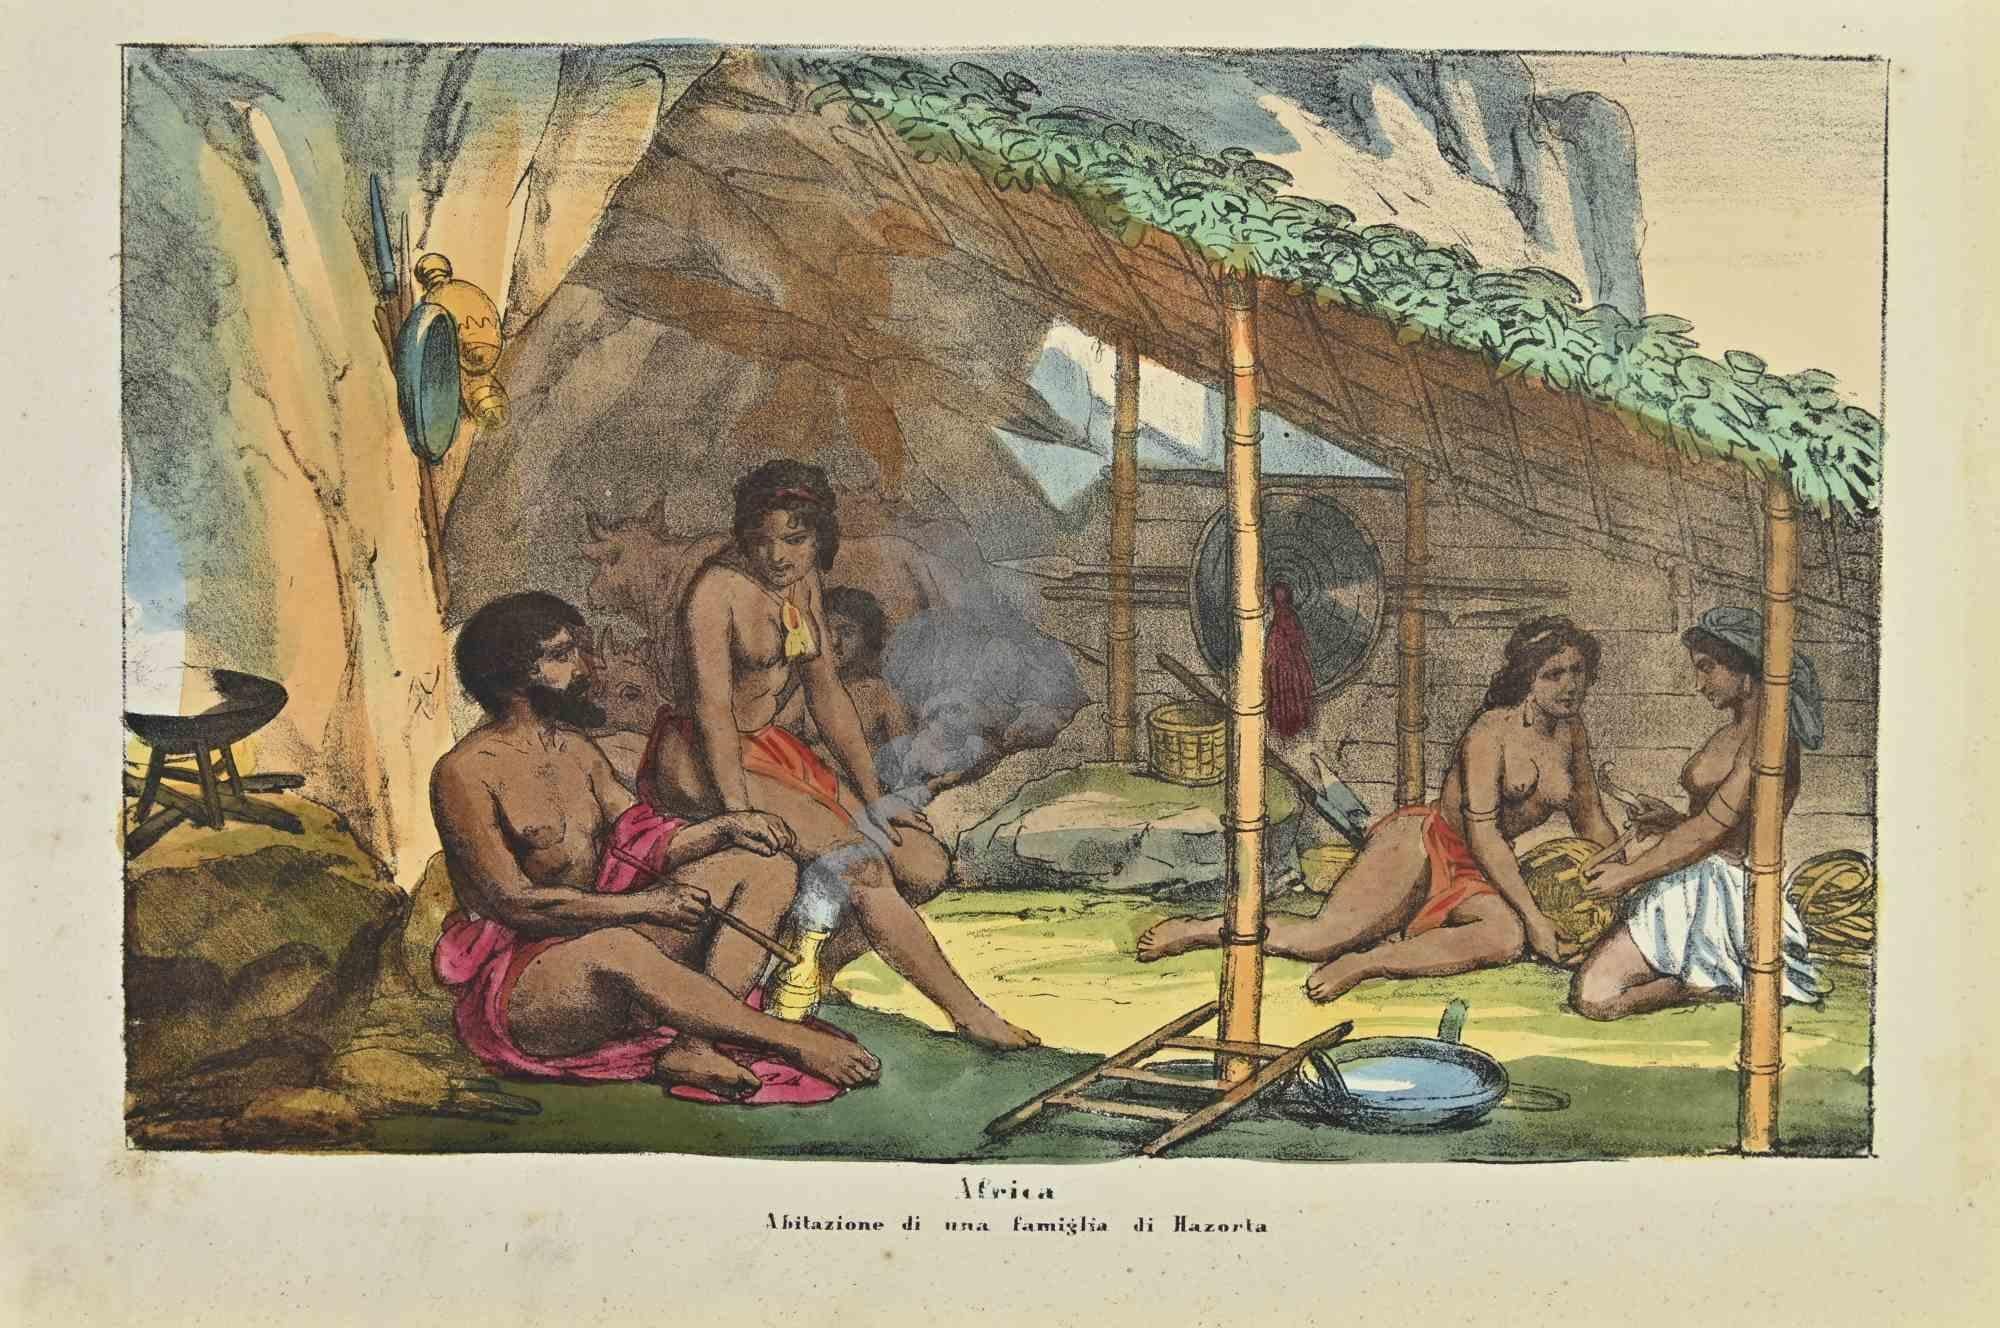 Ancient African Costumes is a lithograph made by Auguste Wahlen in 1844.

Hand colored.

Good condition.

At the center of the artwork is the original title "Africa" and subtitle "Abitazione di una famiglia di Hazorta" (translated, "Home of a family